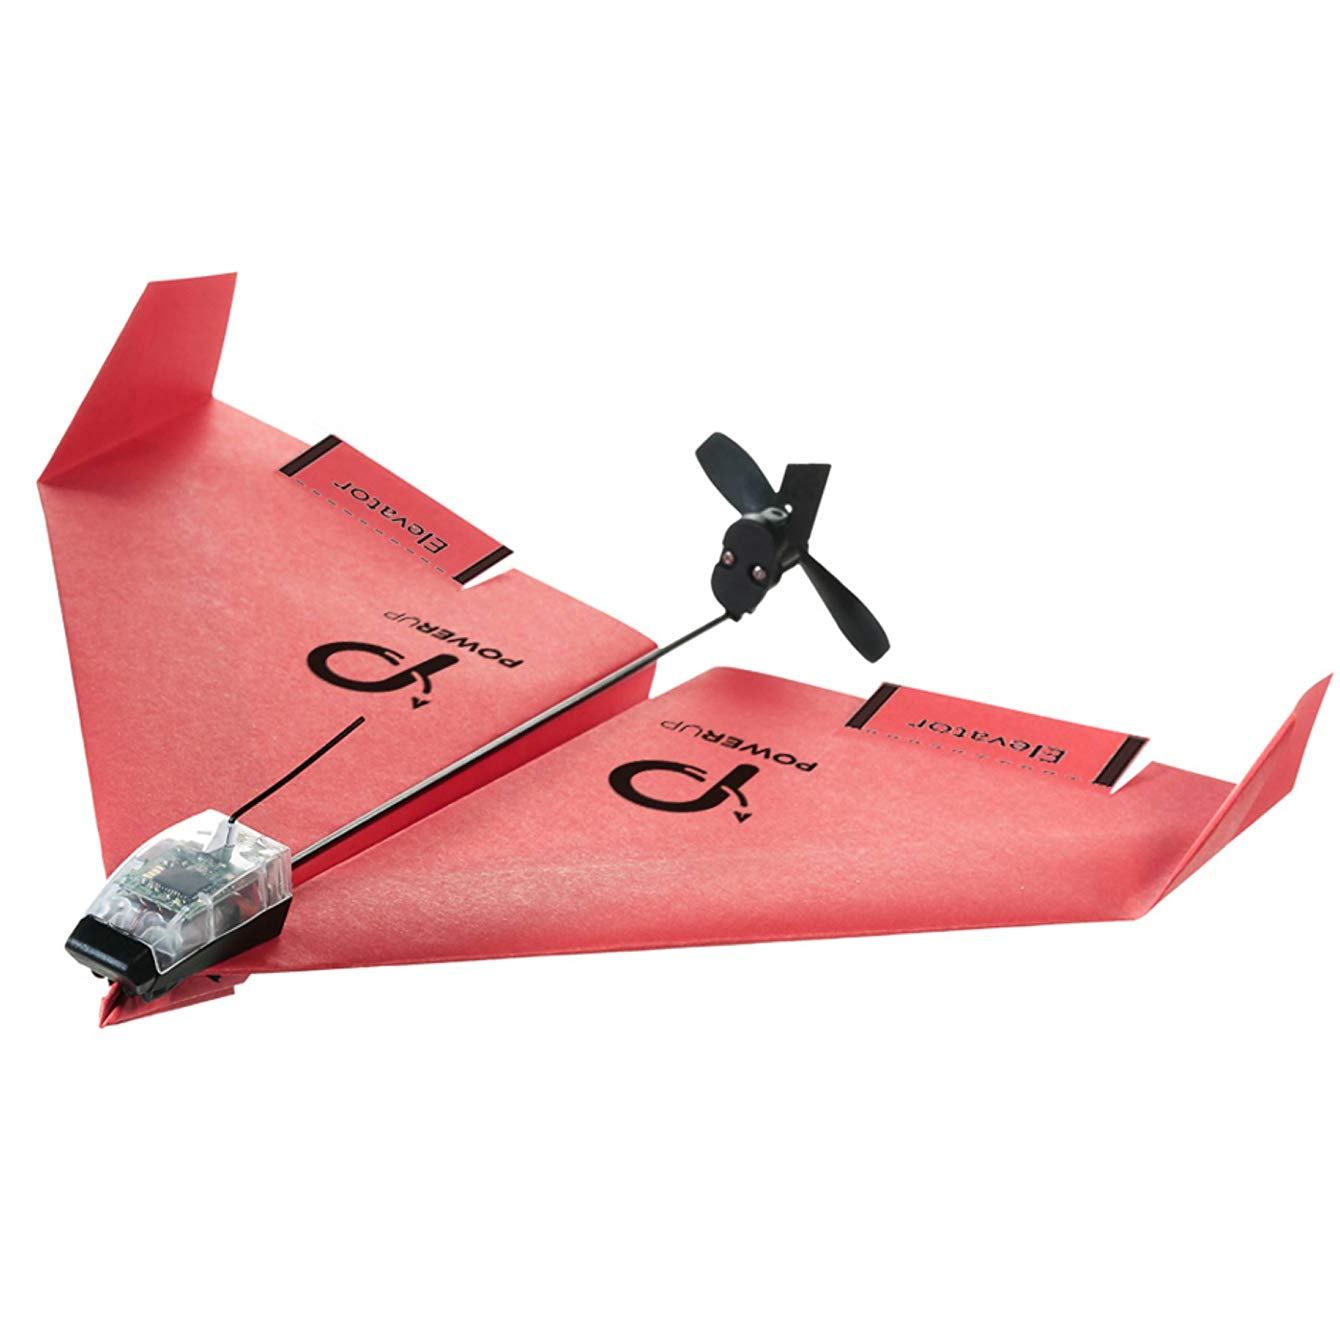 POWERUP 3.0 Smartphone Controlled Paper Airplane Kit - Geek Gifts